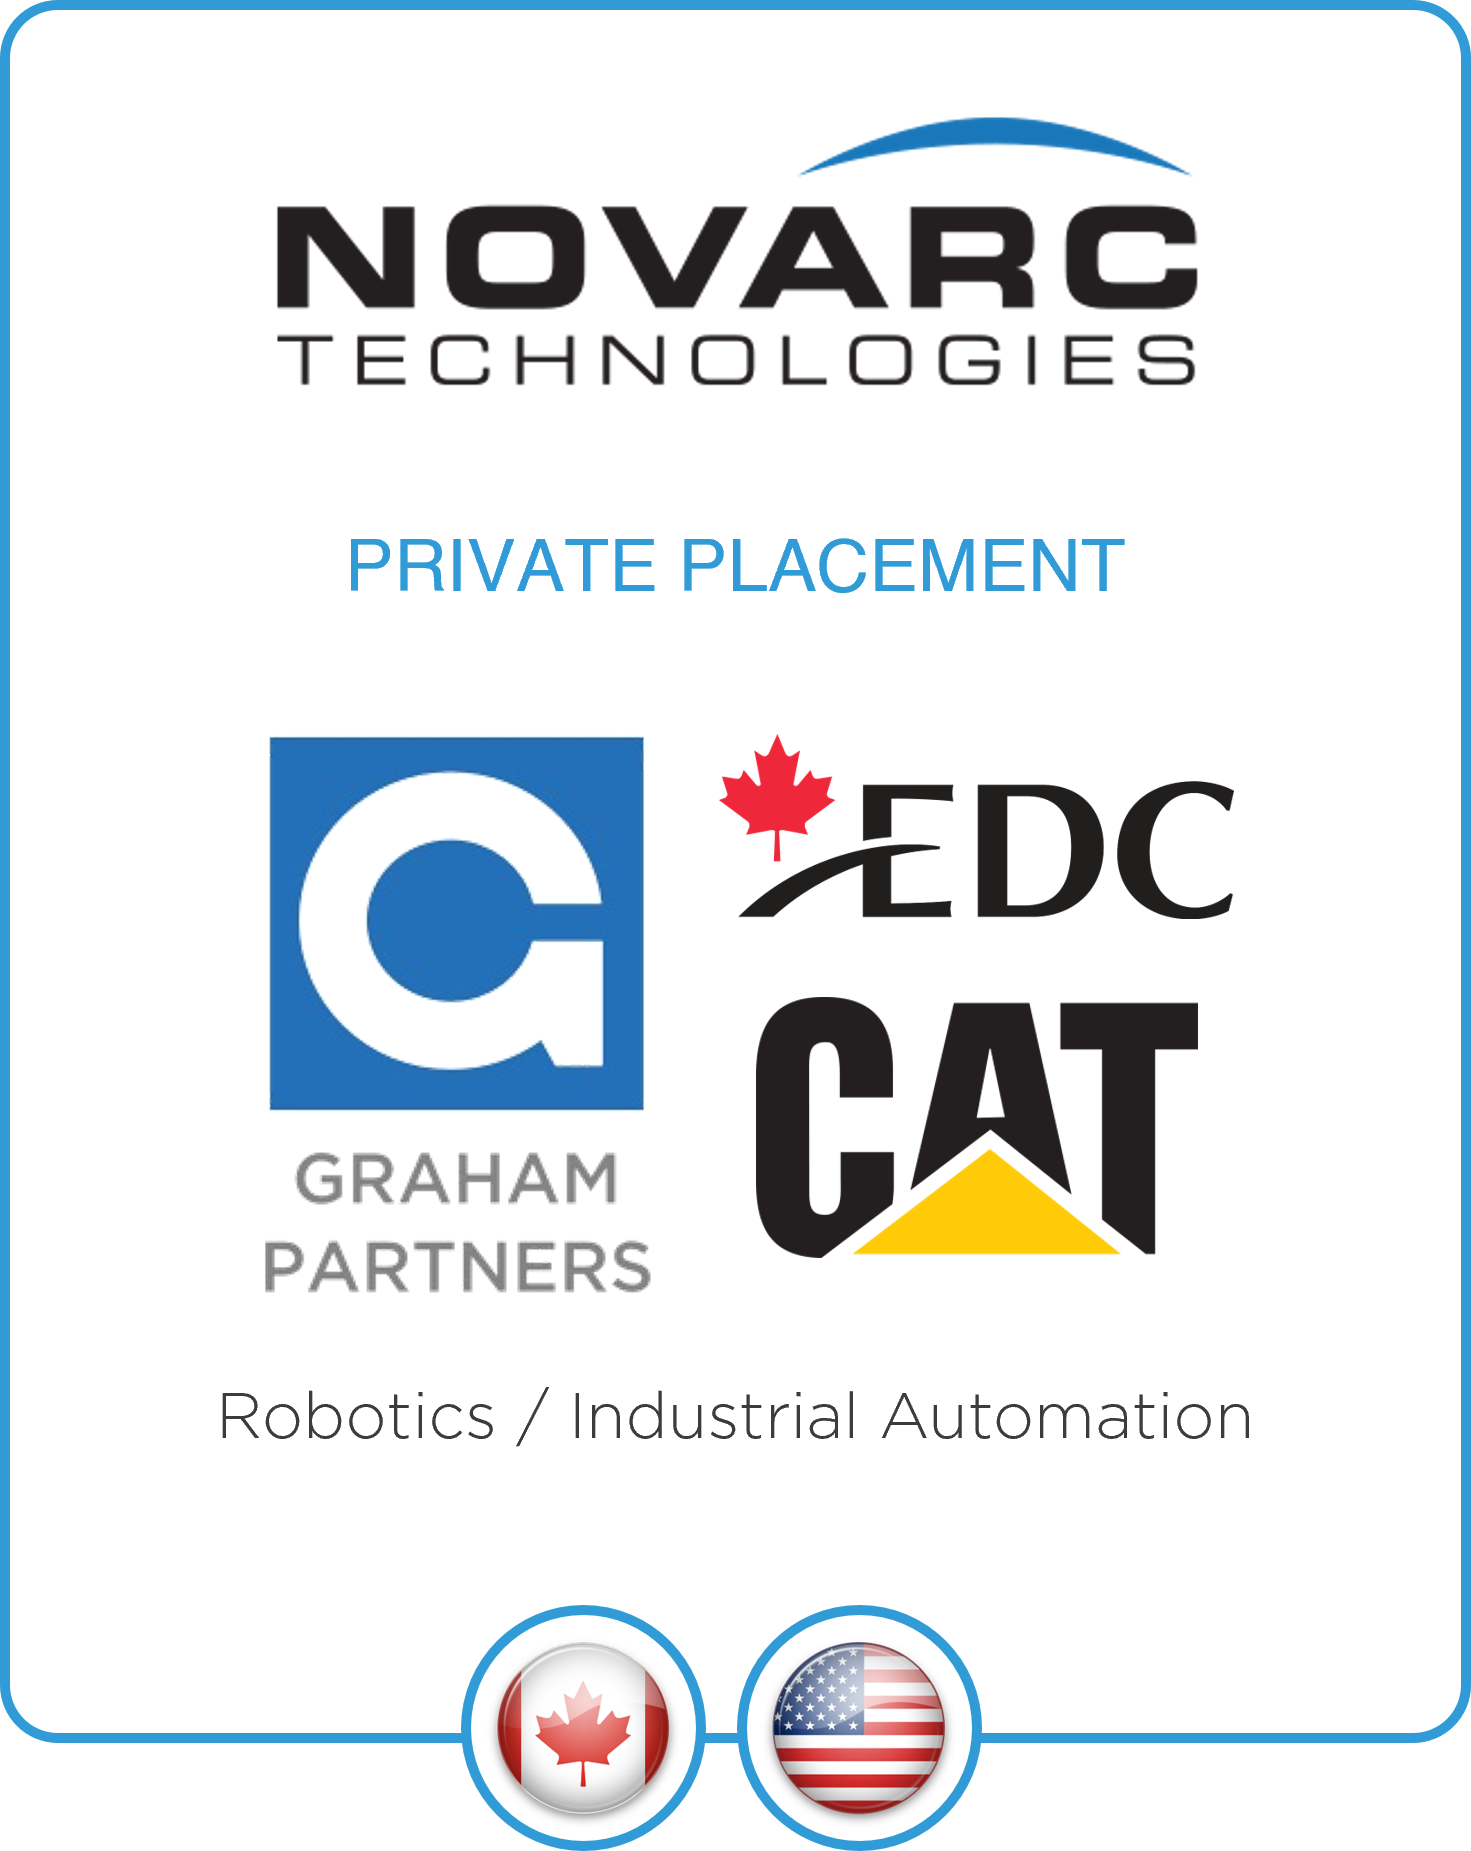 Drake Star Acts as Exclusive Advisor to Novarc Technologies on Fundraising Round With Caterpillar Venture Capital